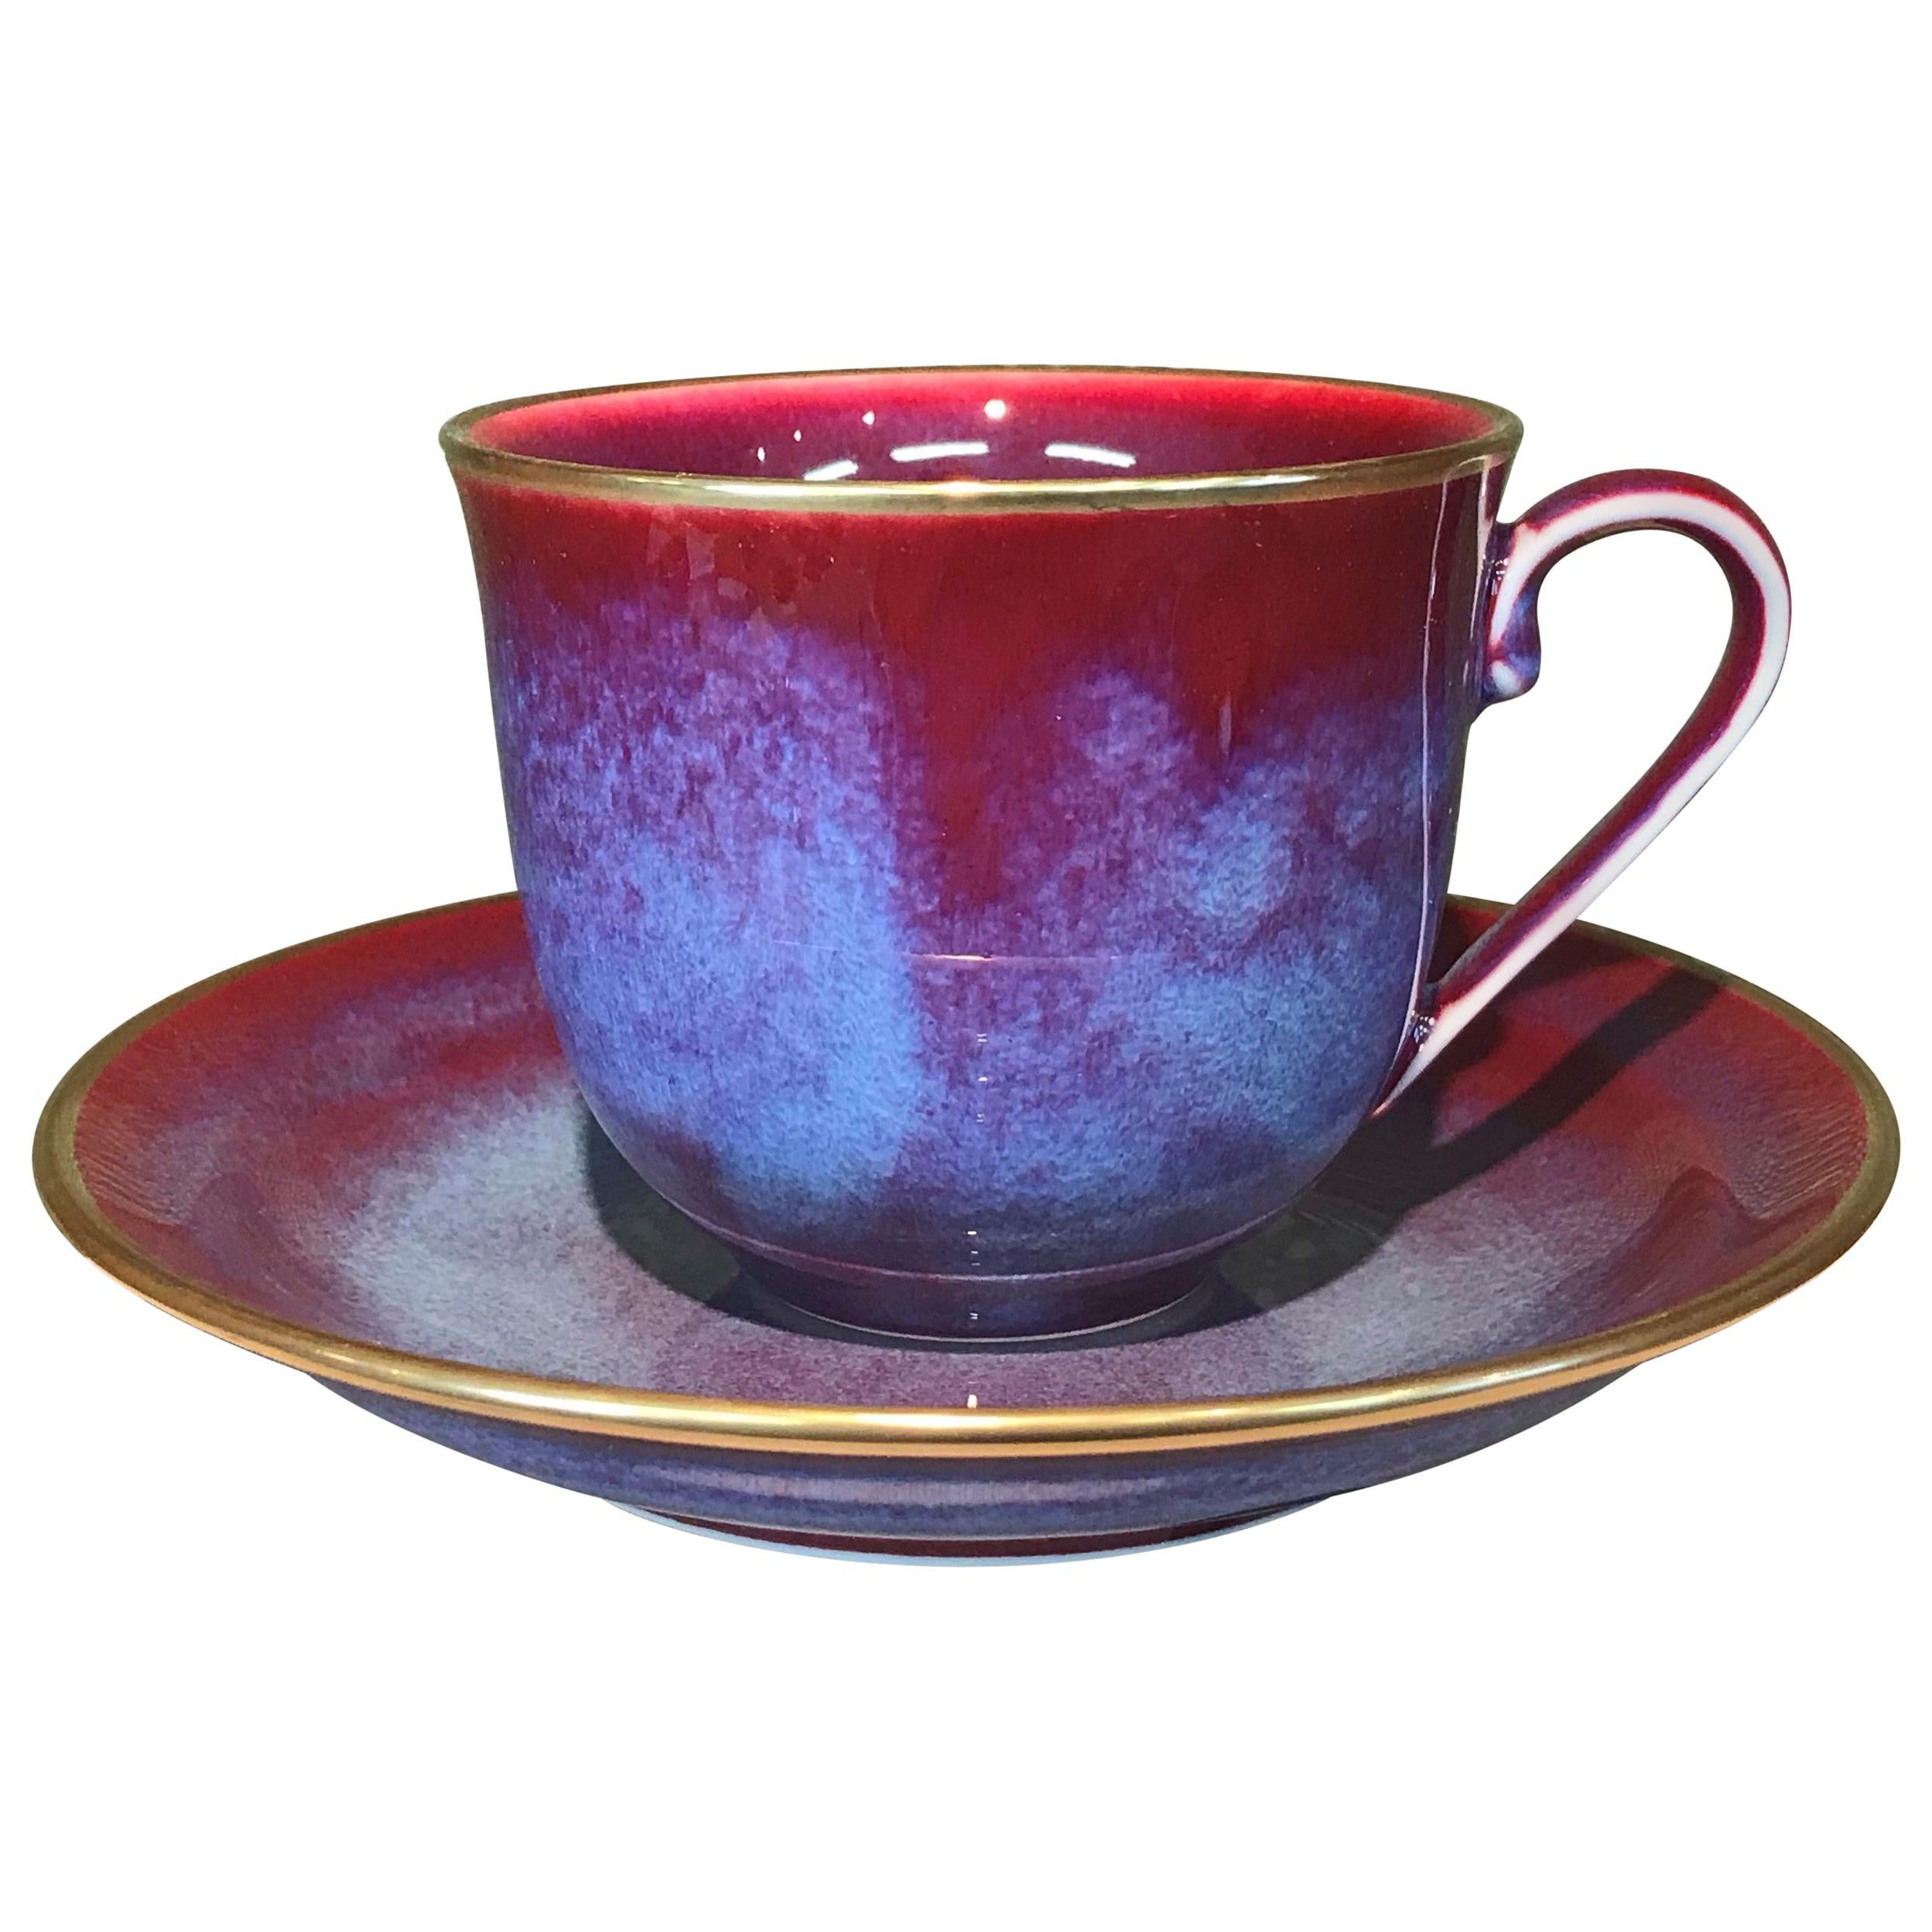 Japanese Hand-Glazed Red Porcelain Cup and Saucer by Contemporary Master Artist